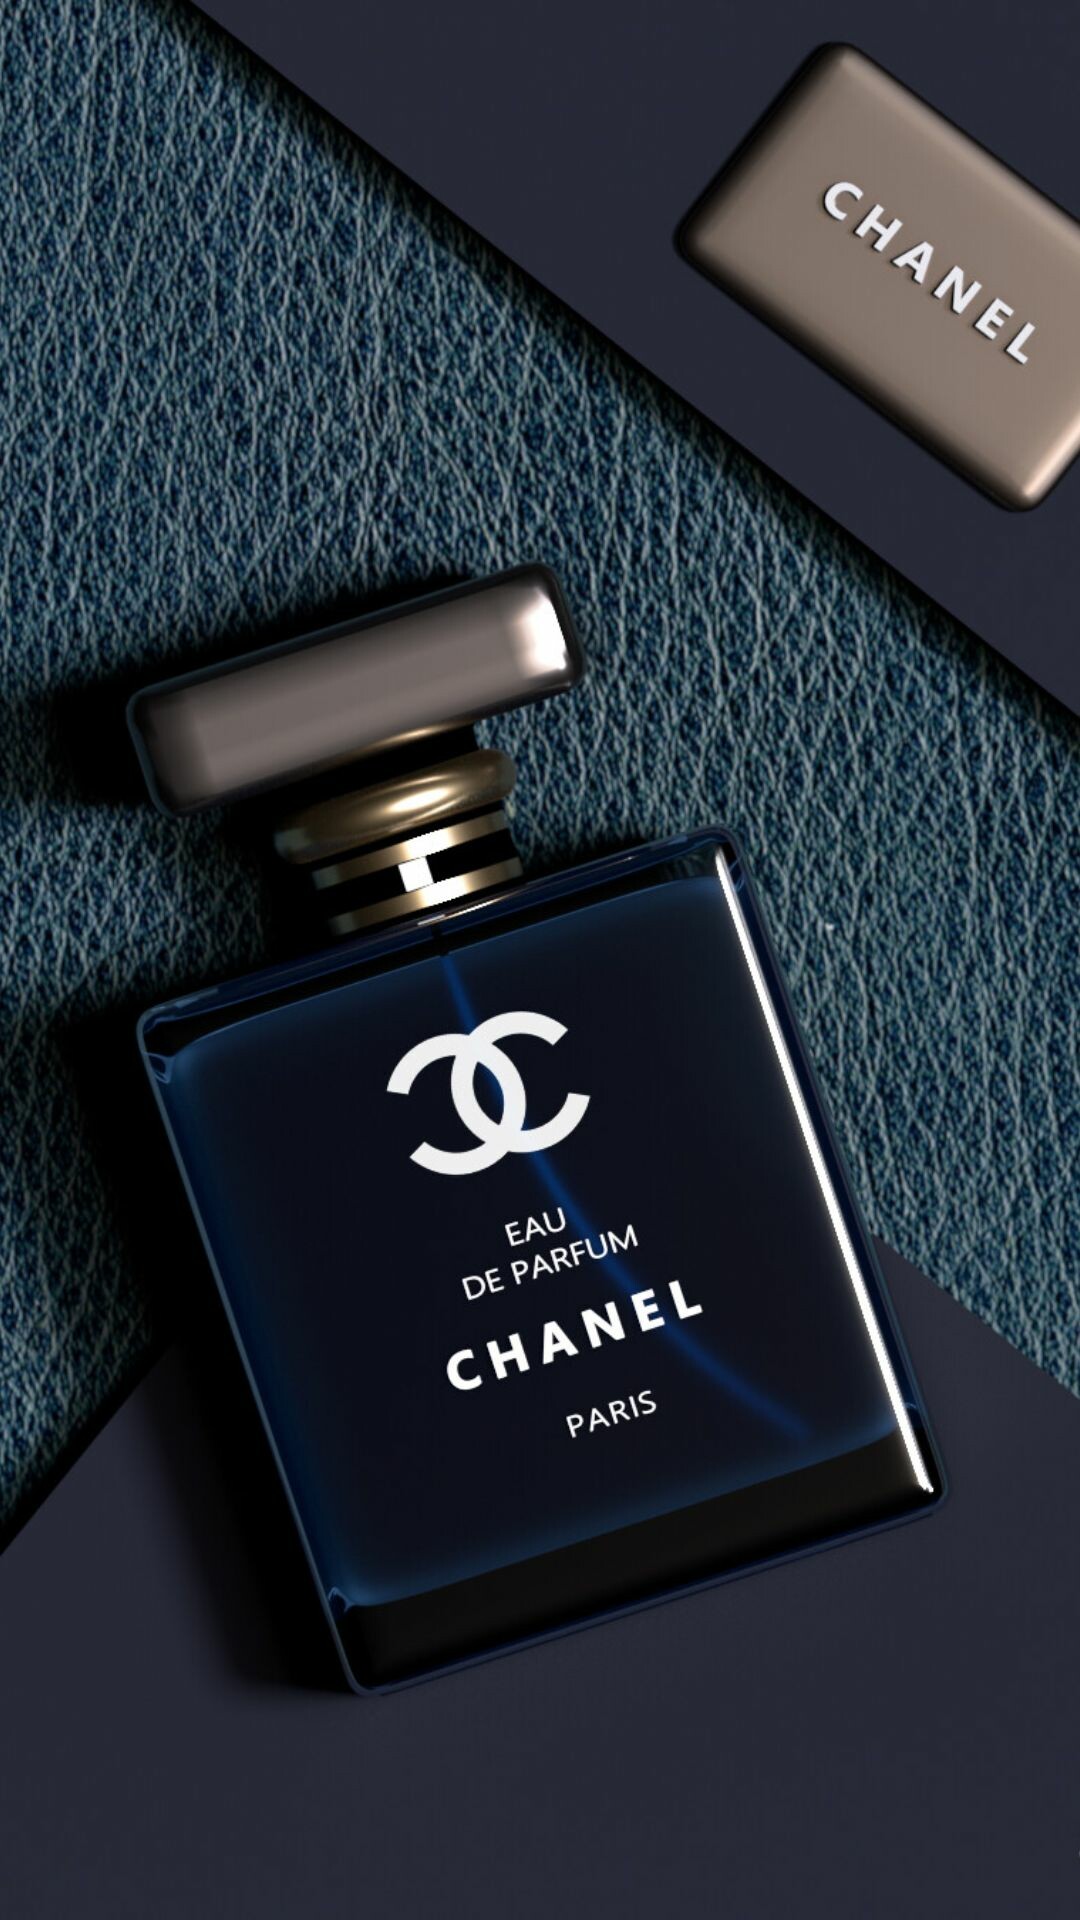 Chanel wallpapers, Best Chanel backgrounds, 1080x1920 Full HD Phone